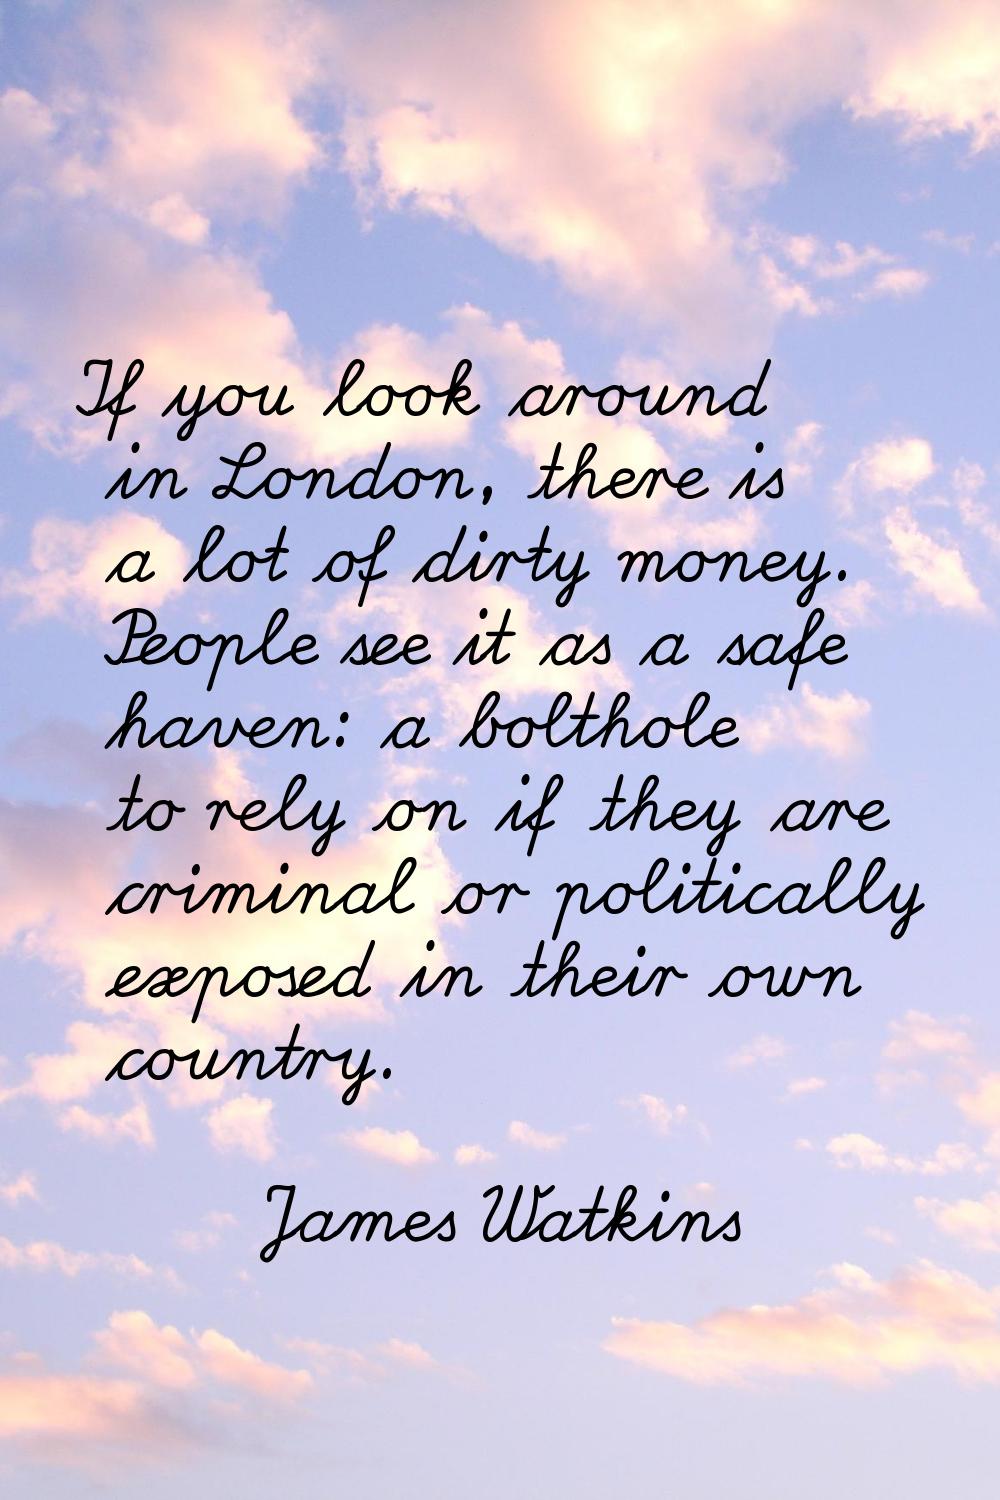 If you look around in London, there is a lot of dirty money. People see it as a safe haven: a bolth